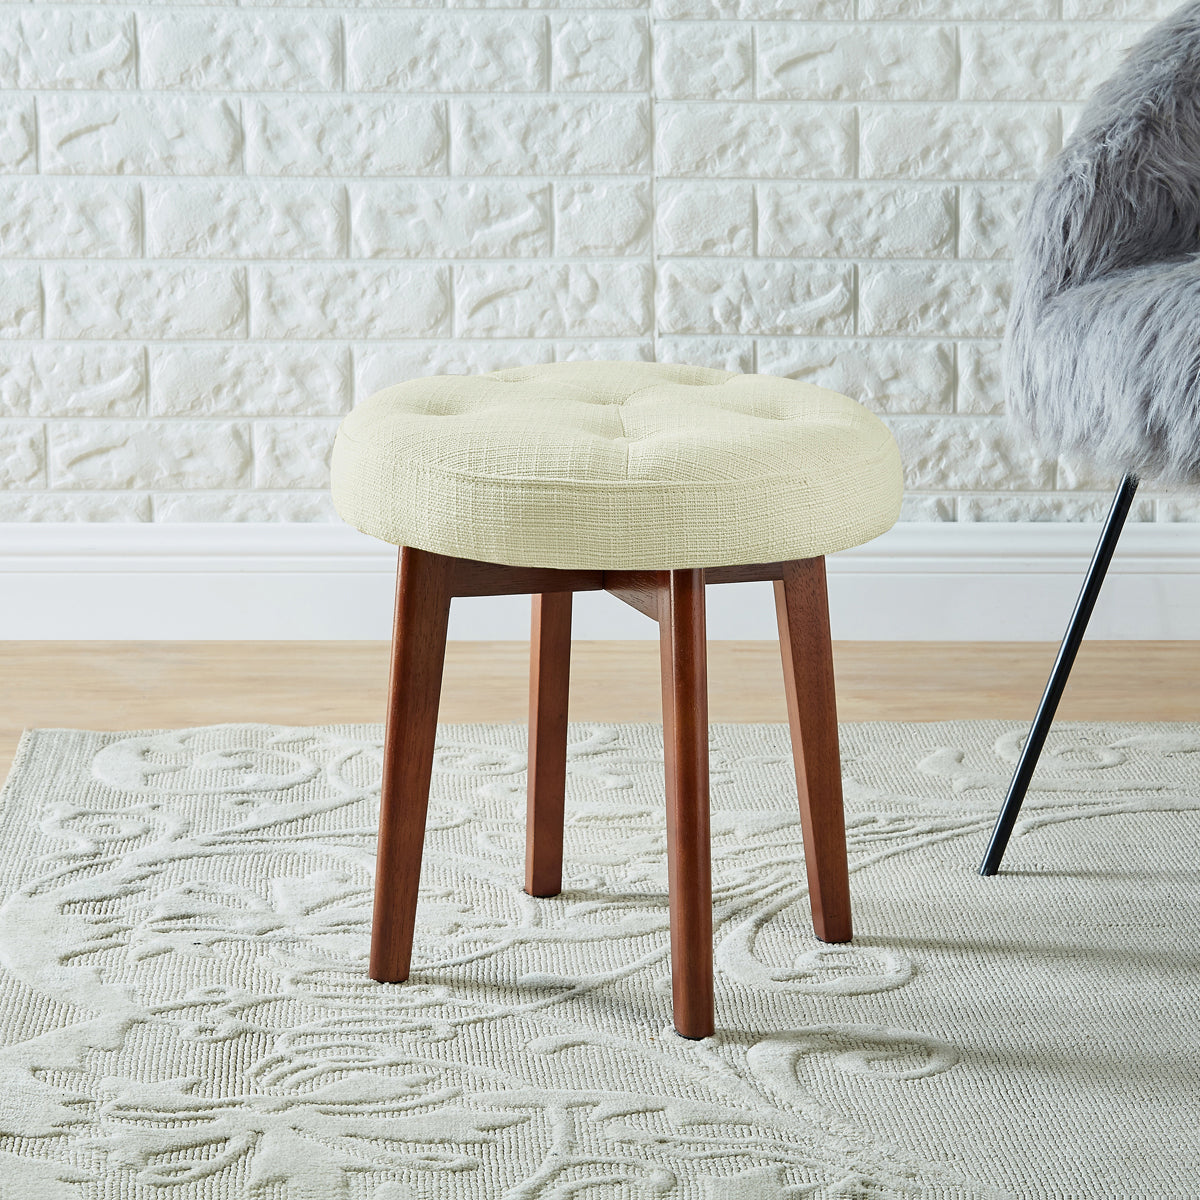 Linen Tufted Round Ottoman with Solid Wood Leg, Upholstered Padded